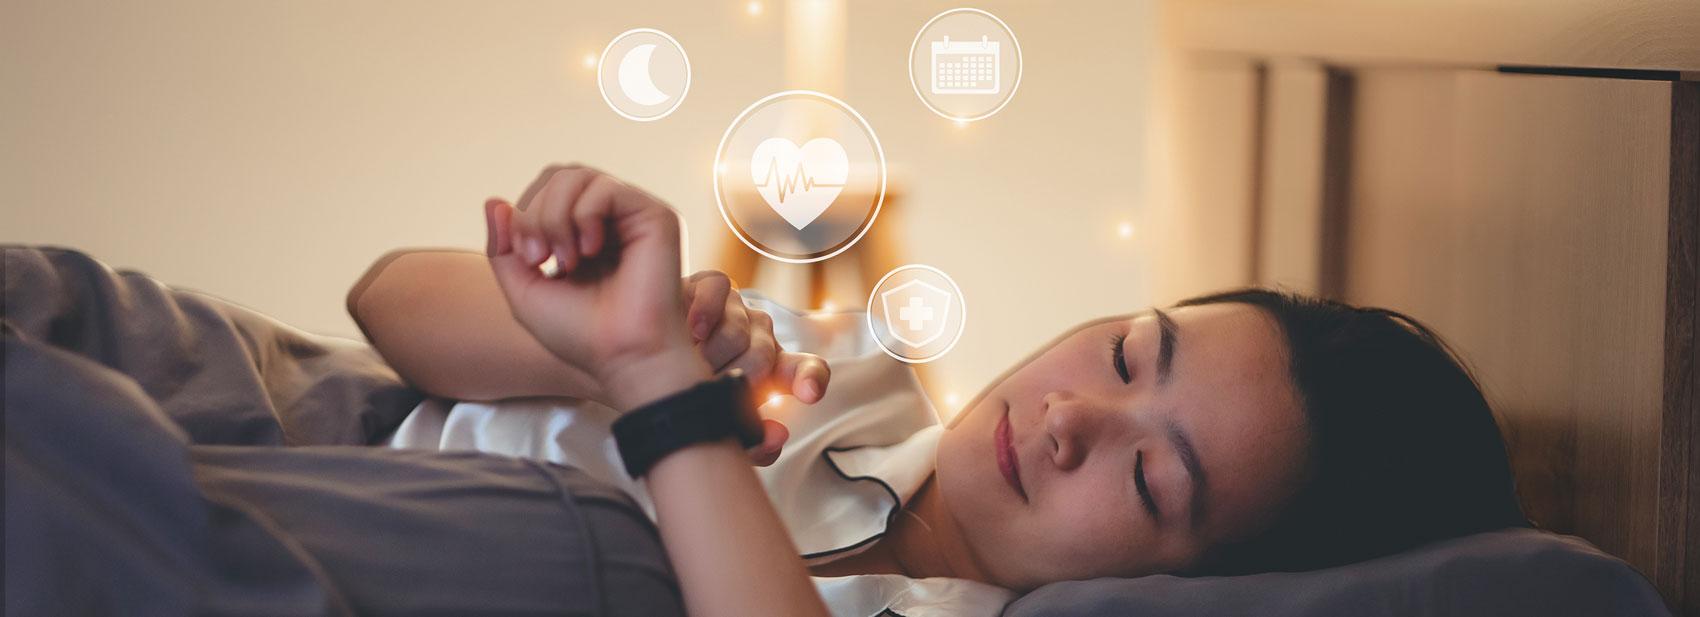 Woman lying in bed looking at her watch, which displays moon, heartbeat, calendar, and medical icons